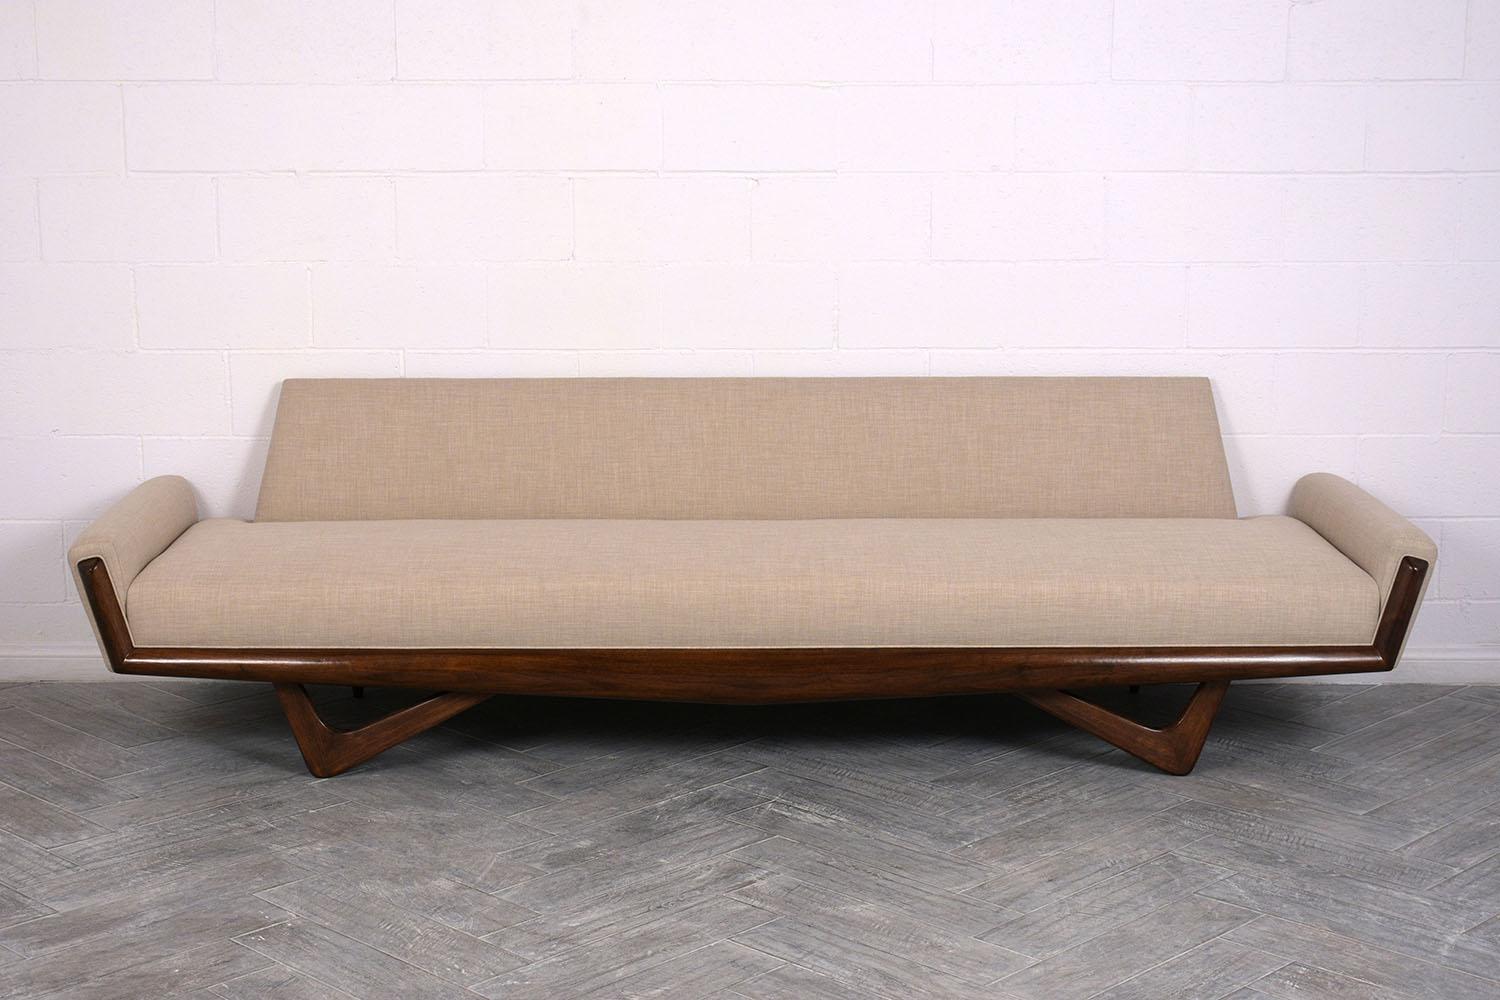 This 1960’s Mid-Century Modern sofa is designed by Adrian Pearsall and has been completely restored. The sofa has been professionally reupholstered in a beige color fabric with single piping trim and topstitch details. The sofa is accompanied by